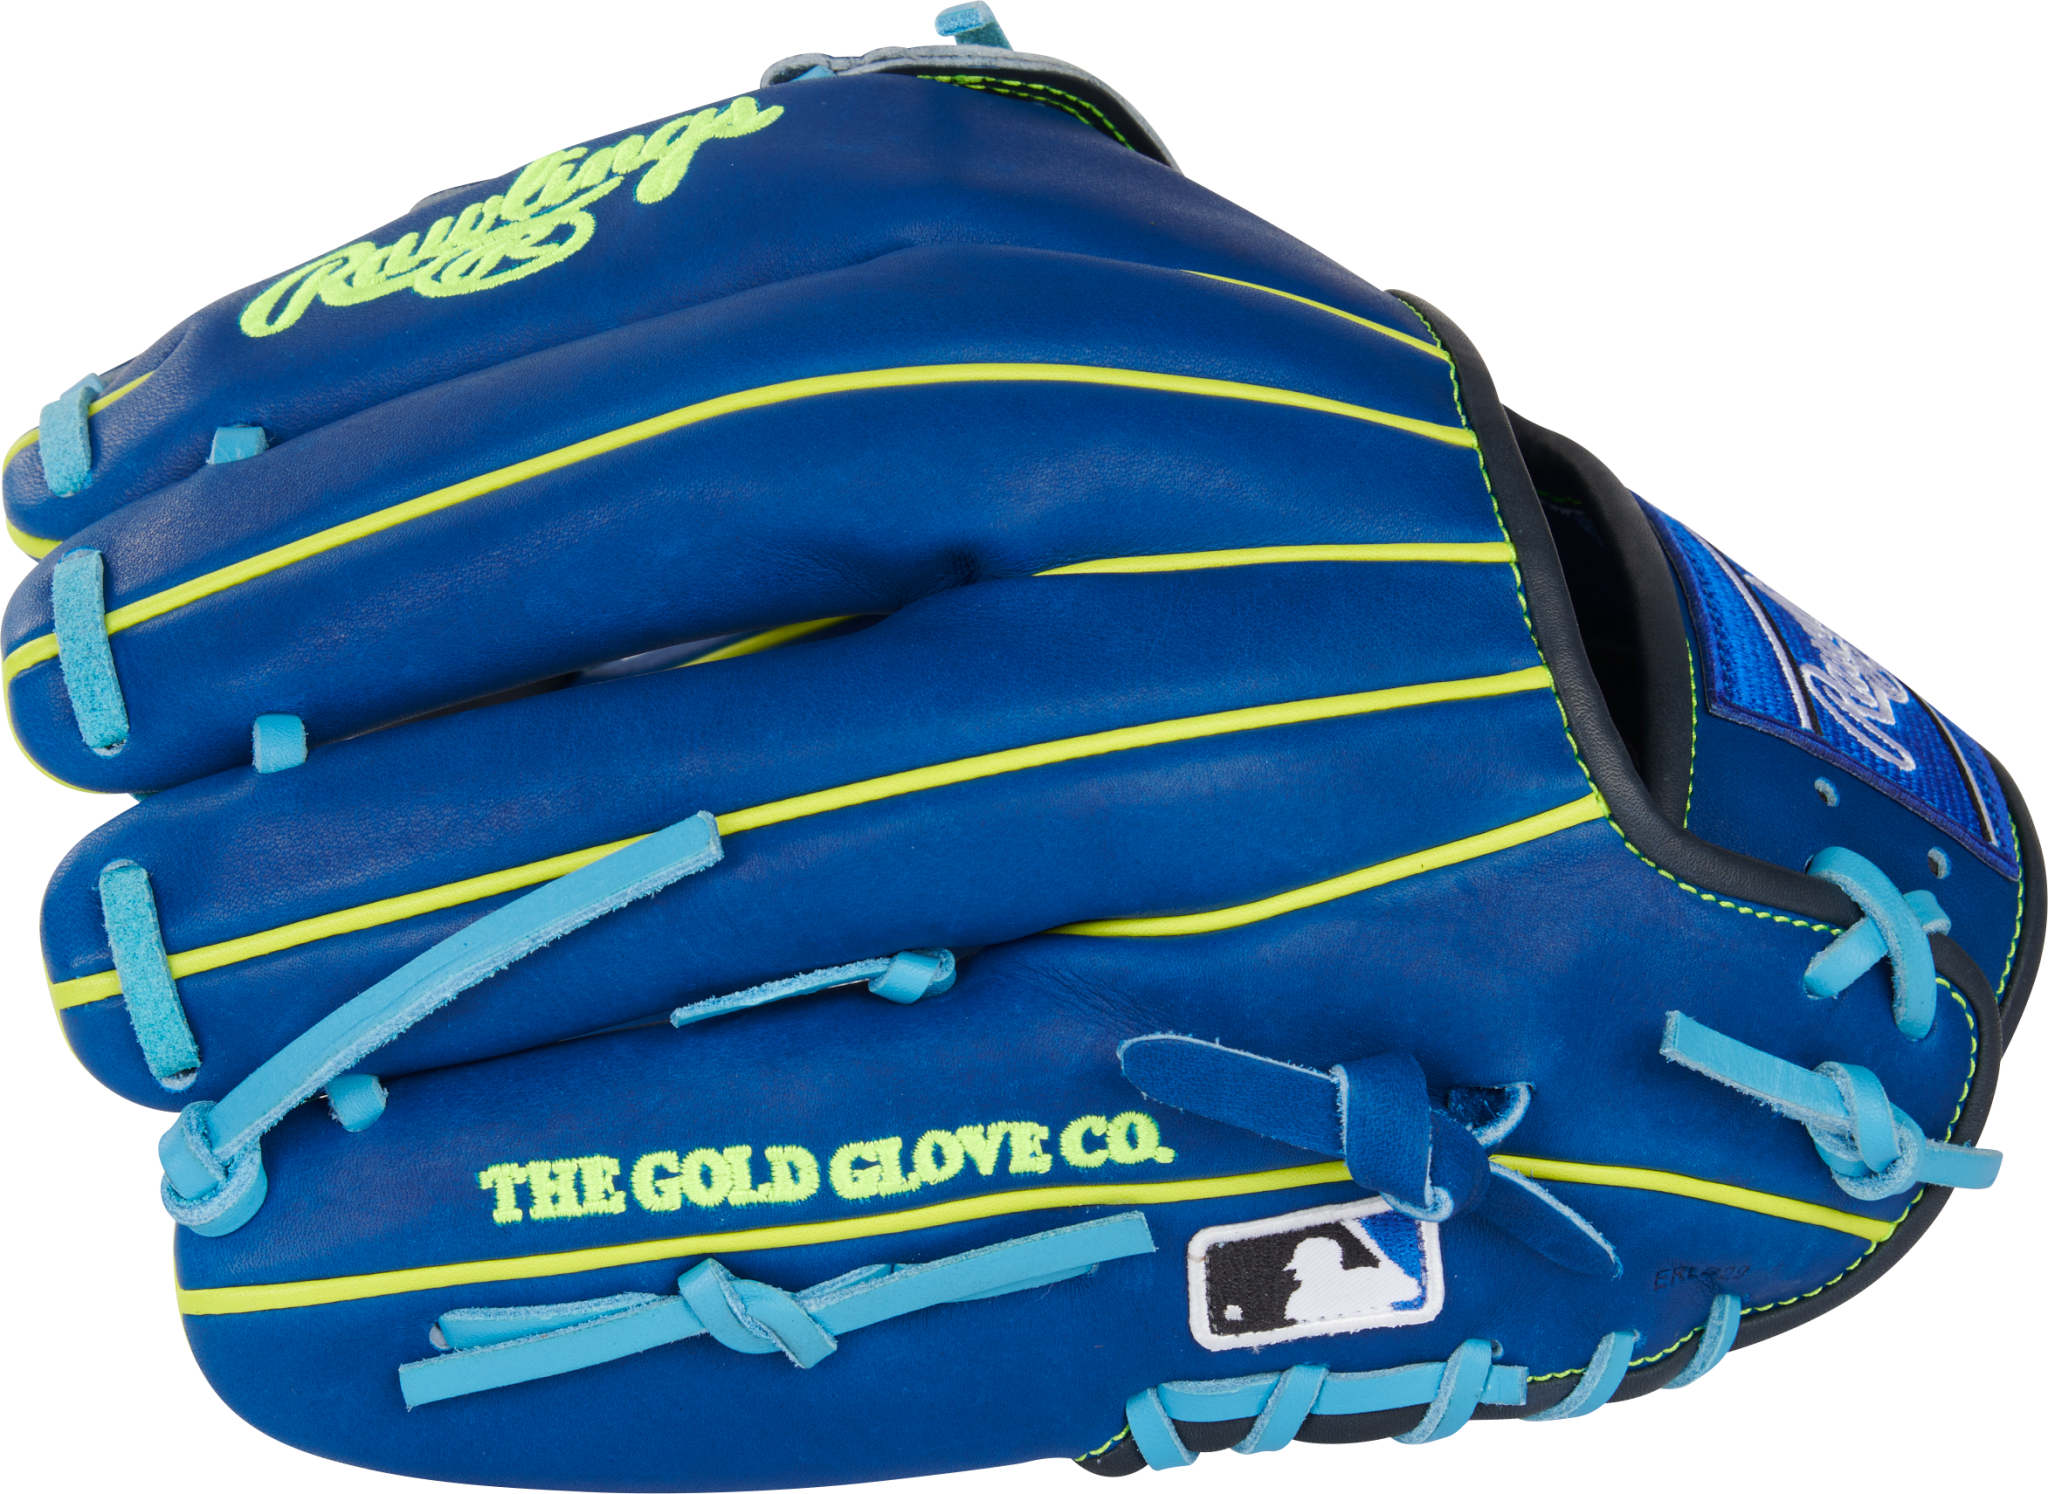 Rawlings July 2022 Gold Glove Club RGGC (GOTM) Heart of the Hide Infield Glove 11.75"